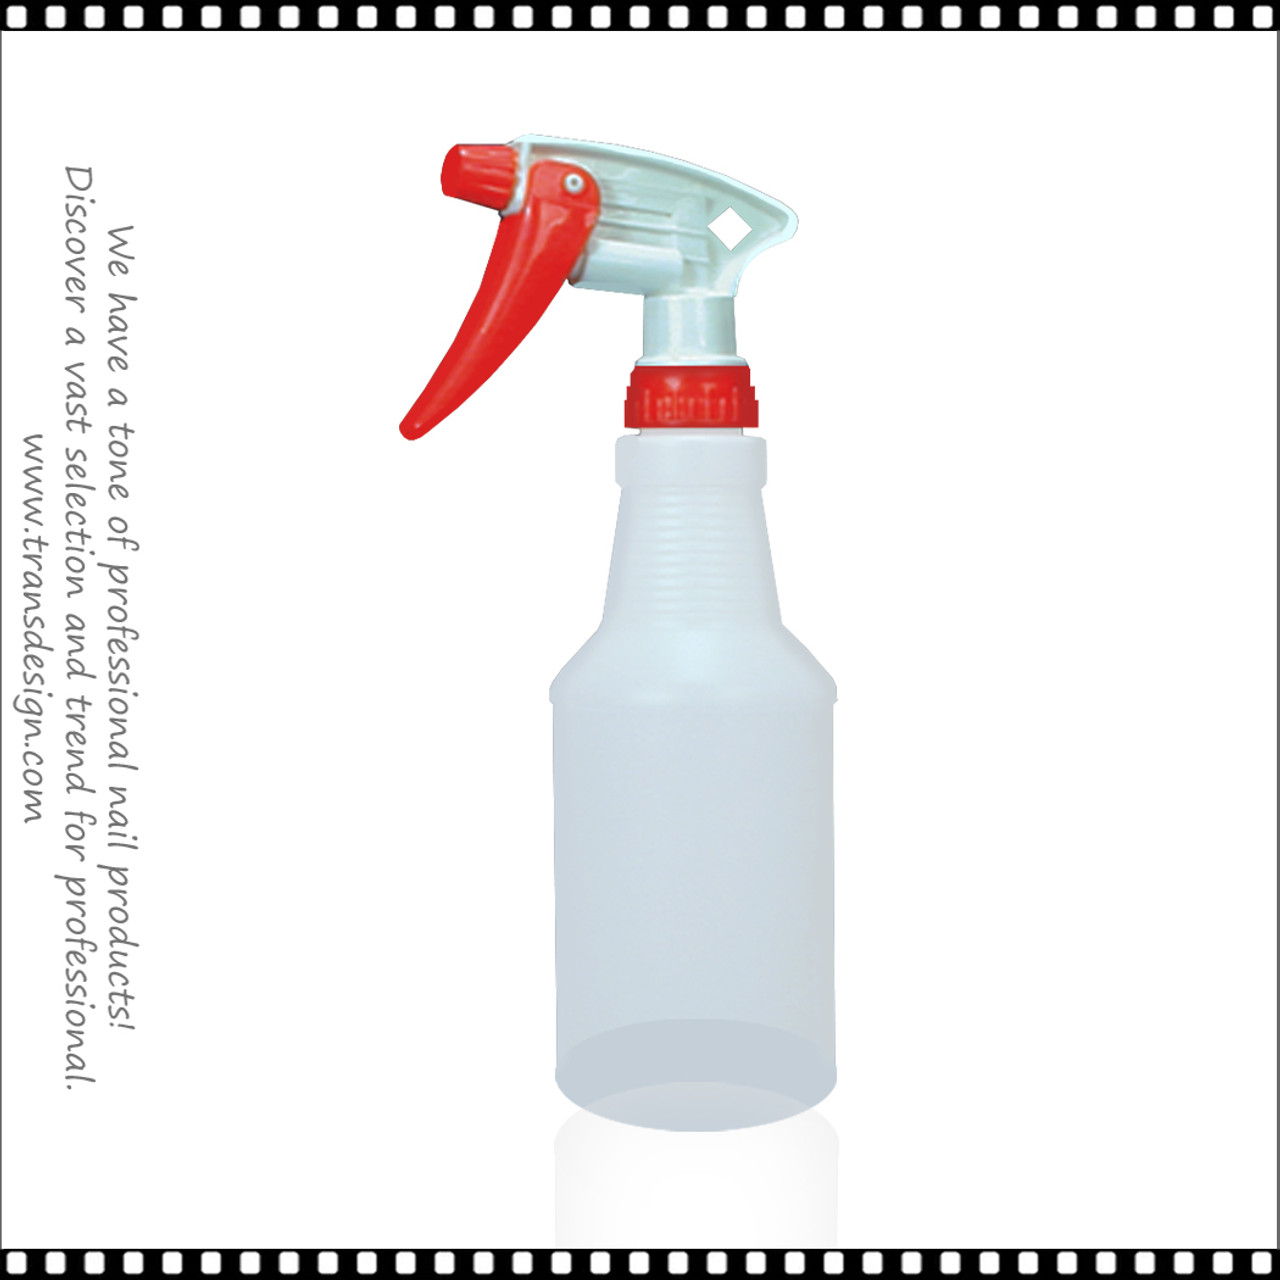 Product Container Dilution Bottle W/Trigger Sprayer 16oz